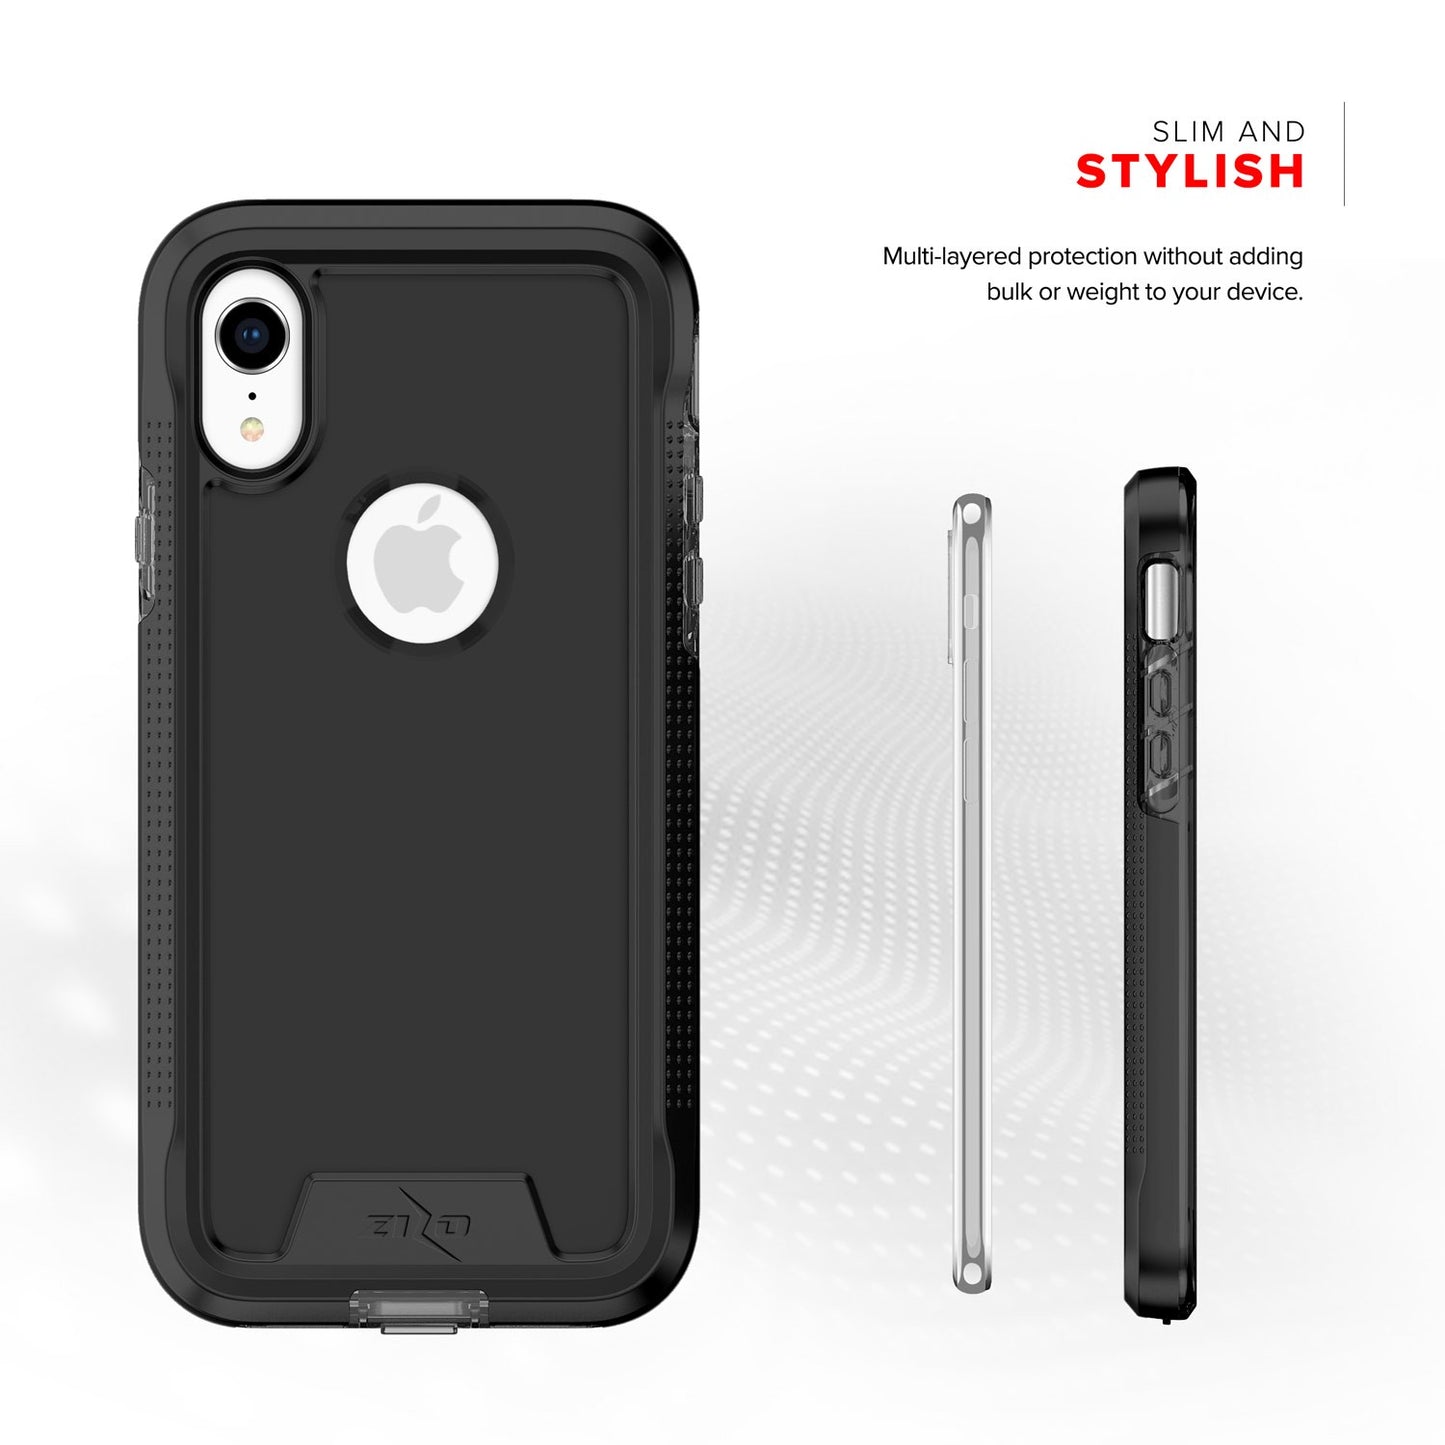 Apple iPhone X/XS- Zizo ION Triple Layered Hybrid Case with Tempered Glass Screen Protector - Black / Smoke